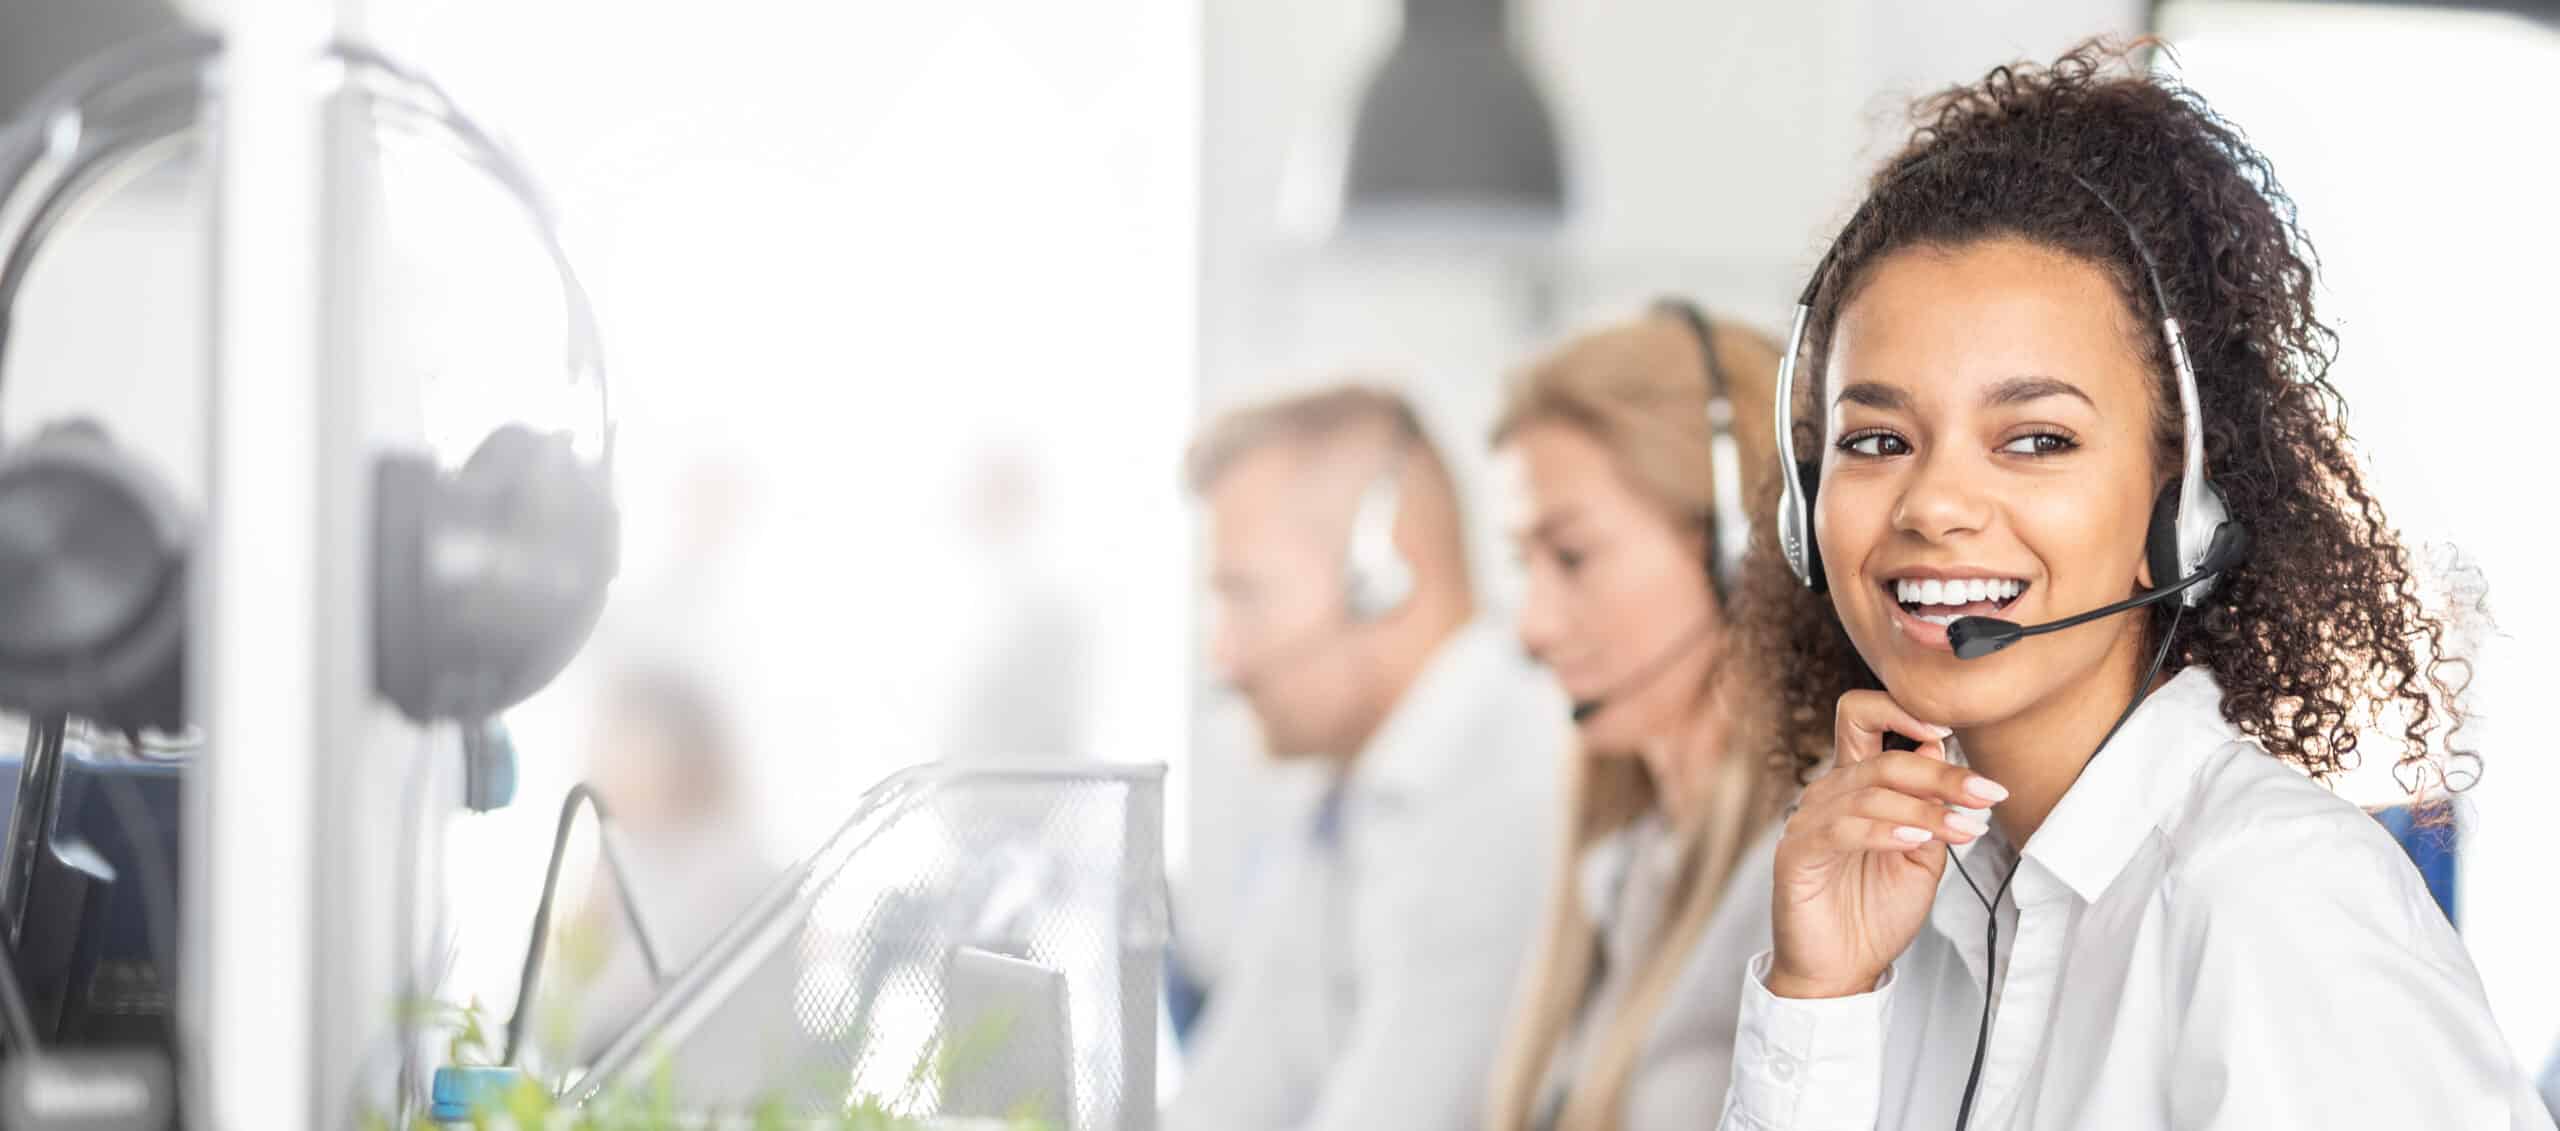 Call center worker accompanied by her team